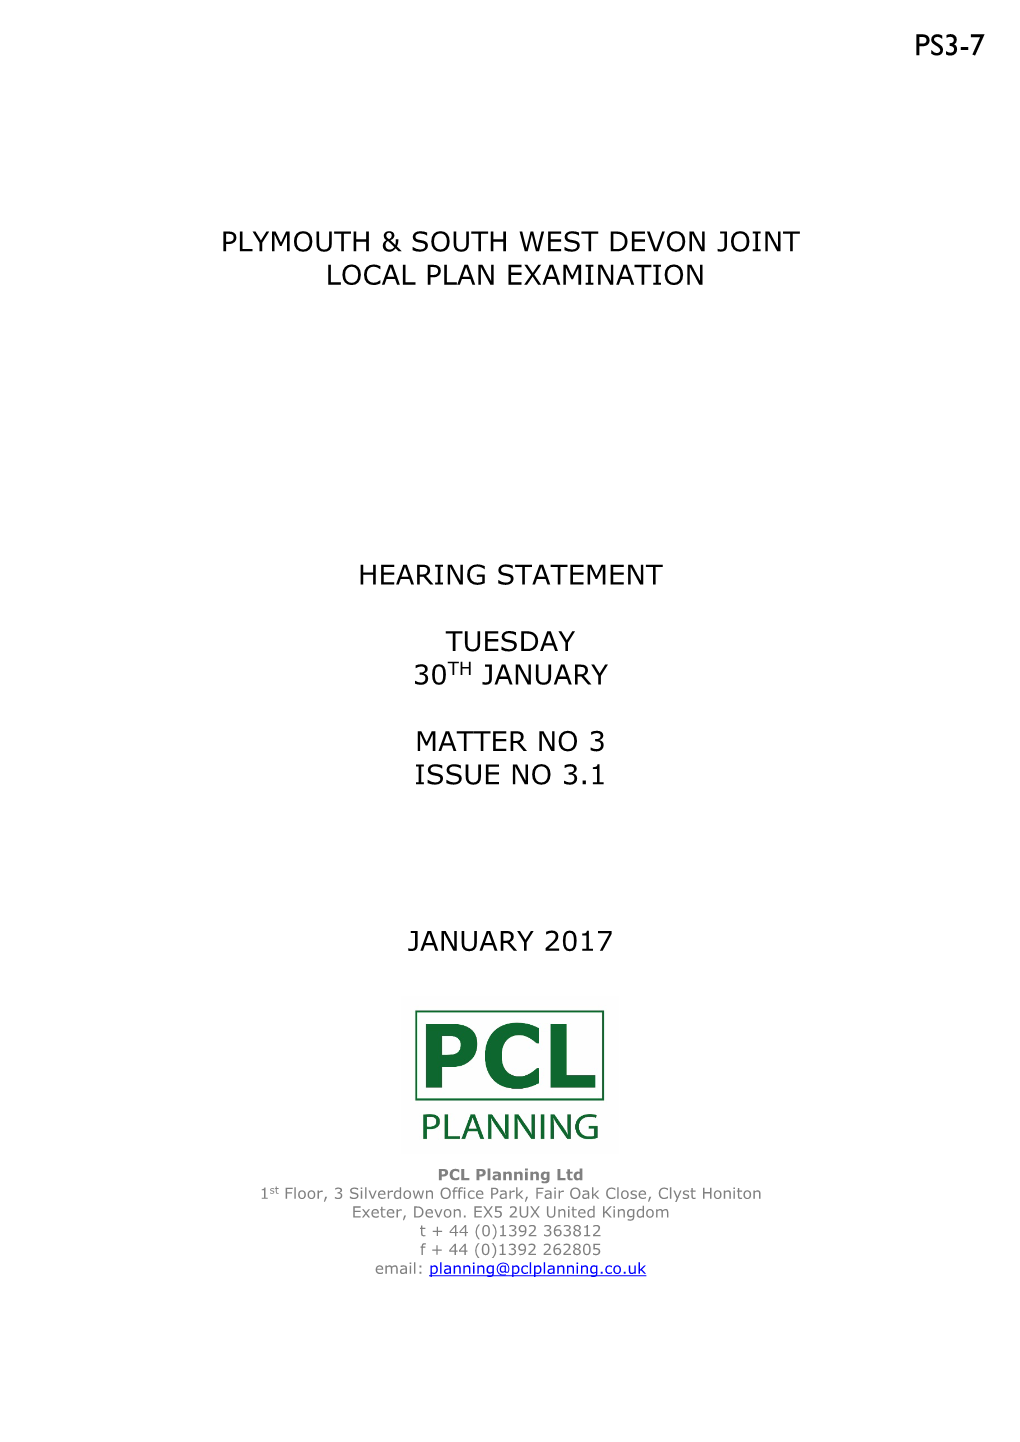 Plymouth & South West Devon Joint Local Plan